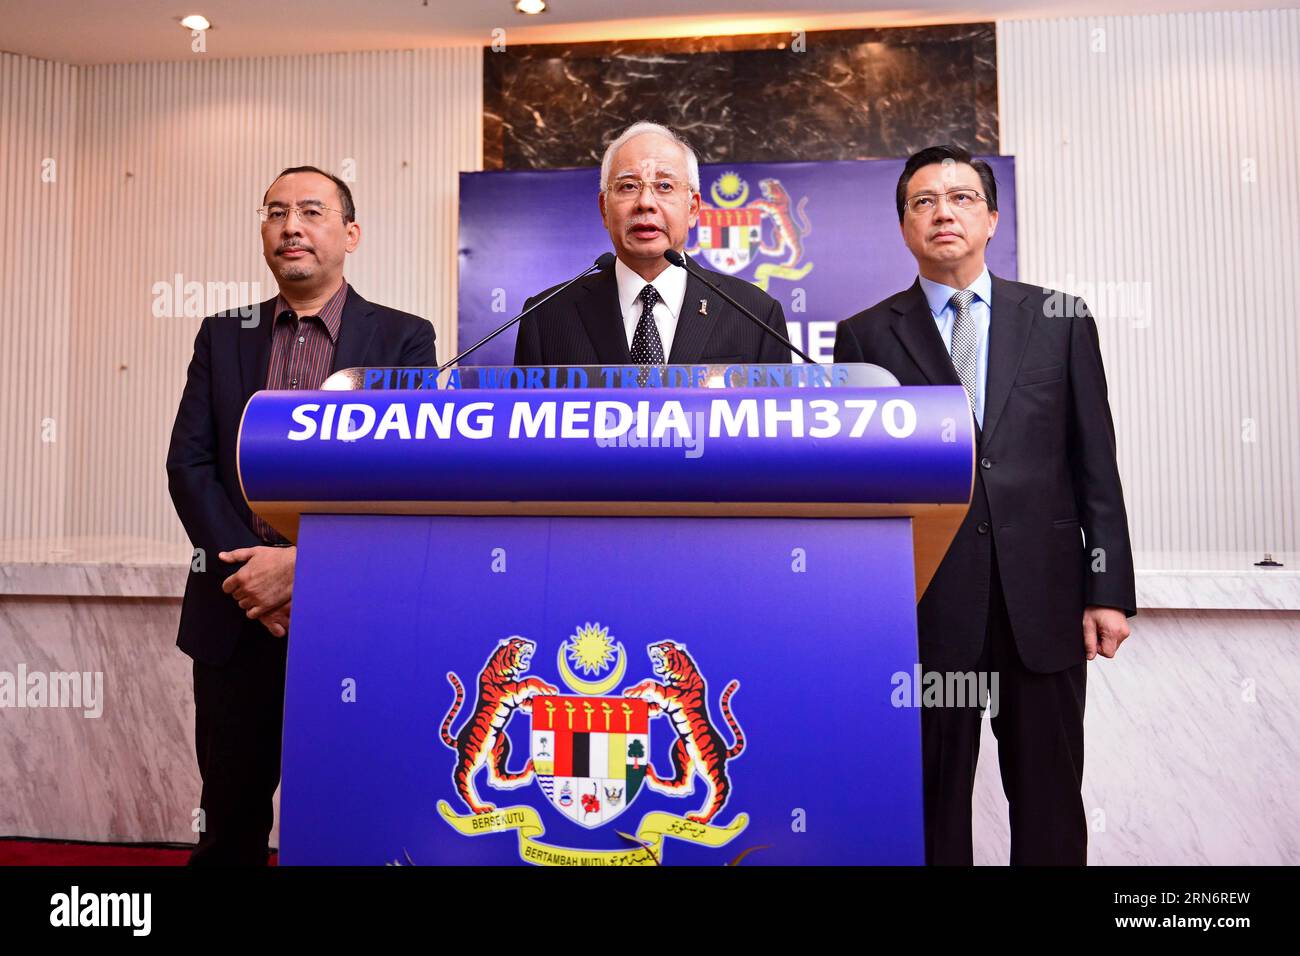 (150806) -- KUALA LUMPUR, Aug. 6, 2015 -- Malaysian Prime Minister Najib Razak (C) attends a press conference on the missing Malaysian Airlines flight MH370 in Kuala Lumpur, Malaysia, Aug. 6, 2015. Verification had confirmed that the debris discovered on the Reunion Island belongs to the missing Malaysian Airlines flight MH370, Malaysian Prime Minister Najib Razak announced here early on Thursday. ) MALAYSIA-KUALA LUMPUR-PM-MH 370 FLIGHT-PRESS CONFERENCE ChongxVoonxChung PUBLICATIONxNOTxINxCHN   Kuala Lumpur Aug 6 2015 Malaysian Prime Ministers Najib Razak C Attends a Press Conference ON The M Stock Photo